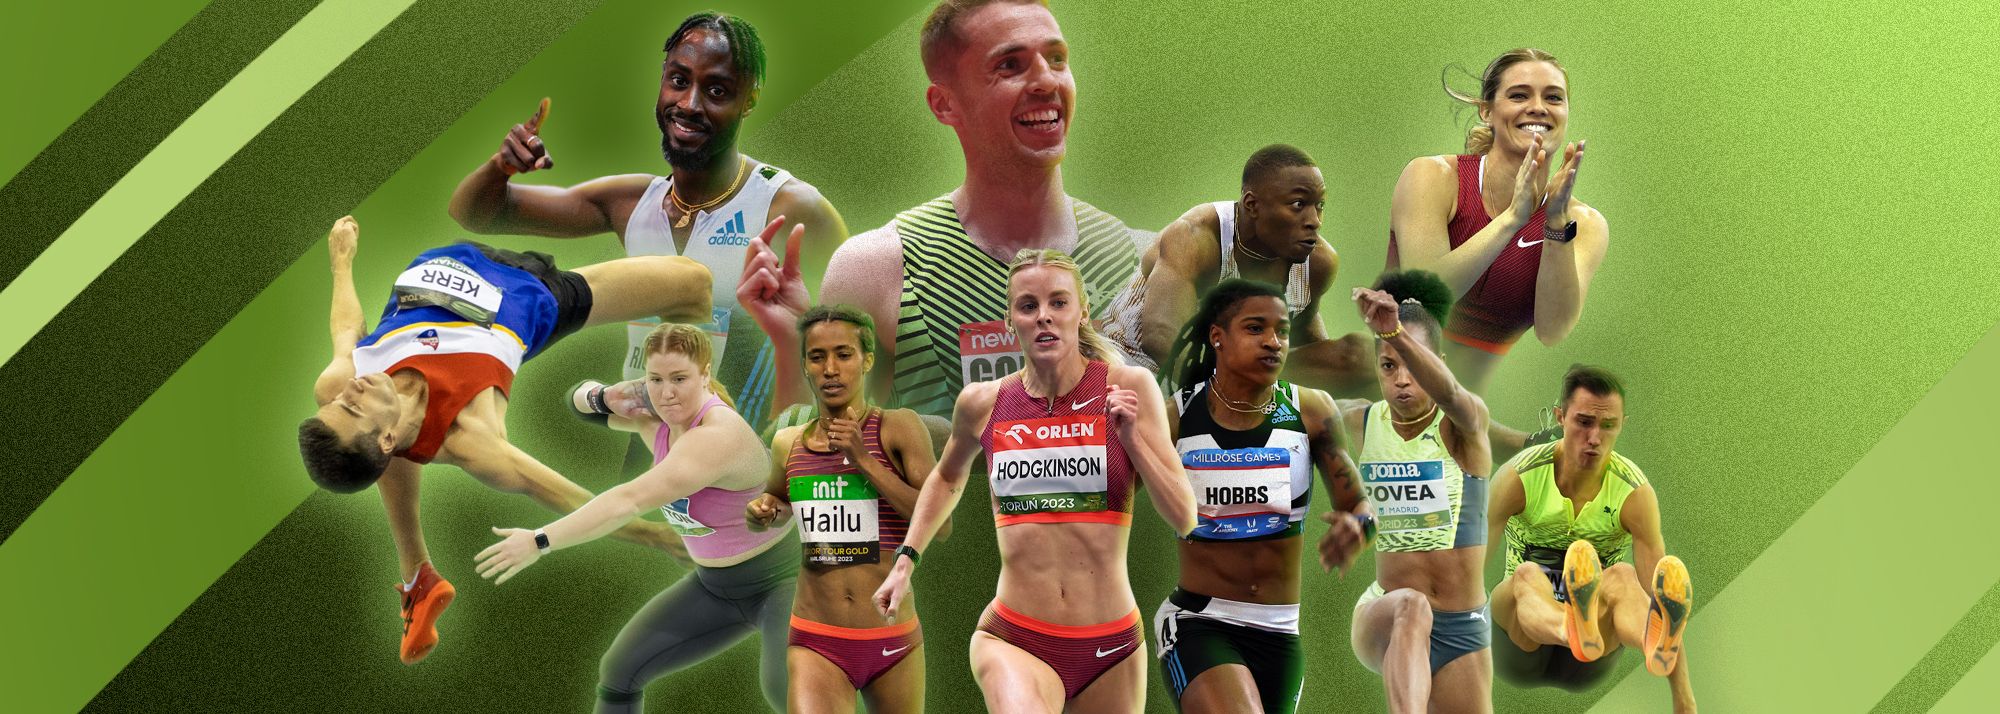 The 11 individual event winners on this year's World Athletics Indoor Tour have secured a provisional place at the World Athletics Indoor Championships Glasgow 24